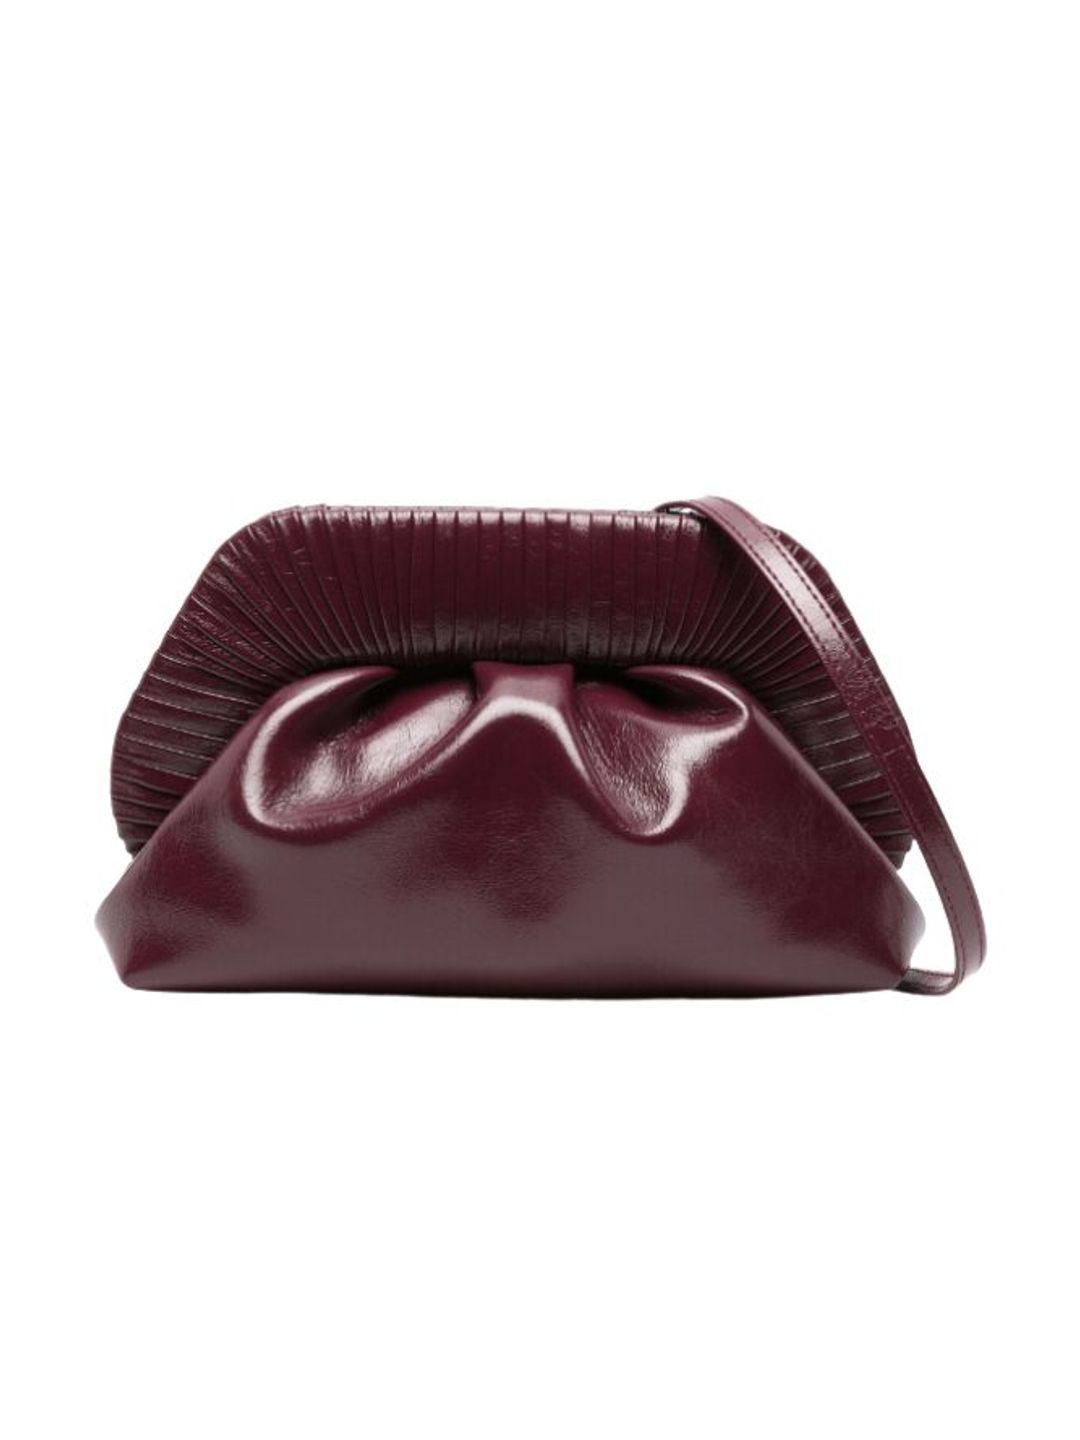 Thermoire burgundy bag 